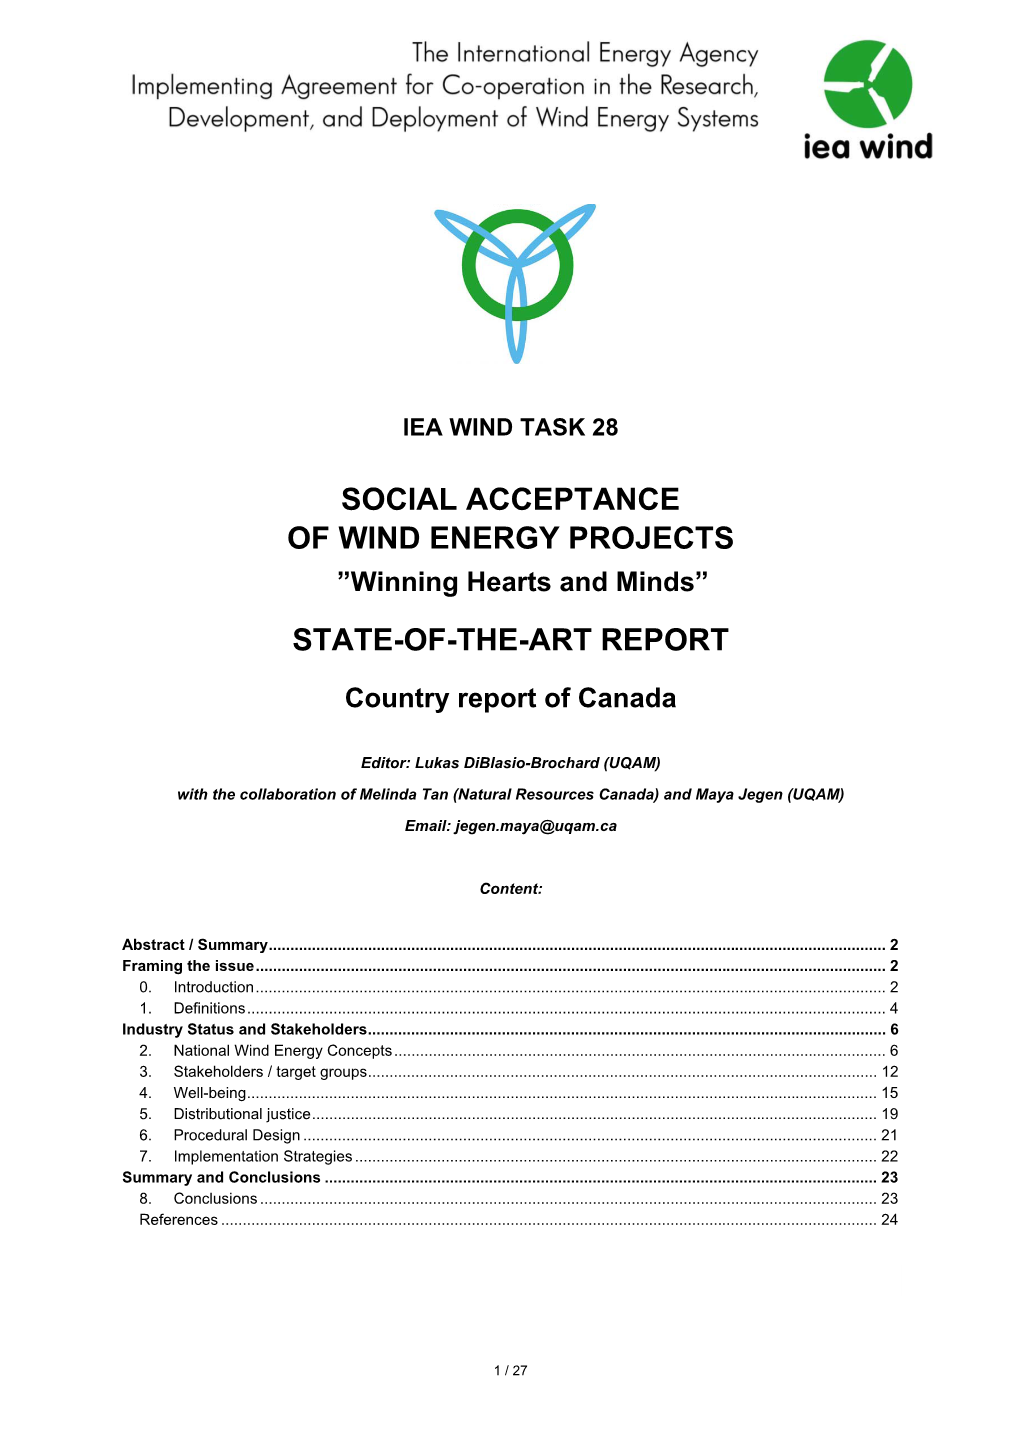 Social Acceptance of Wind Energy Projects State-Of